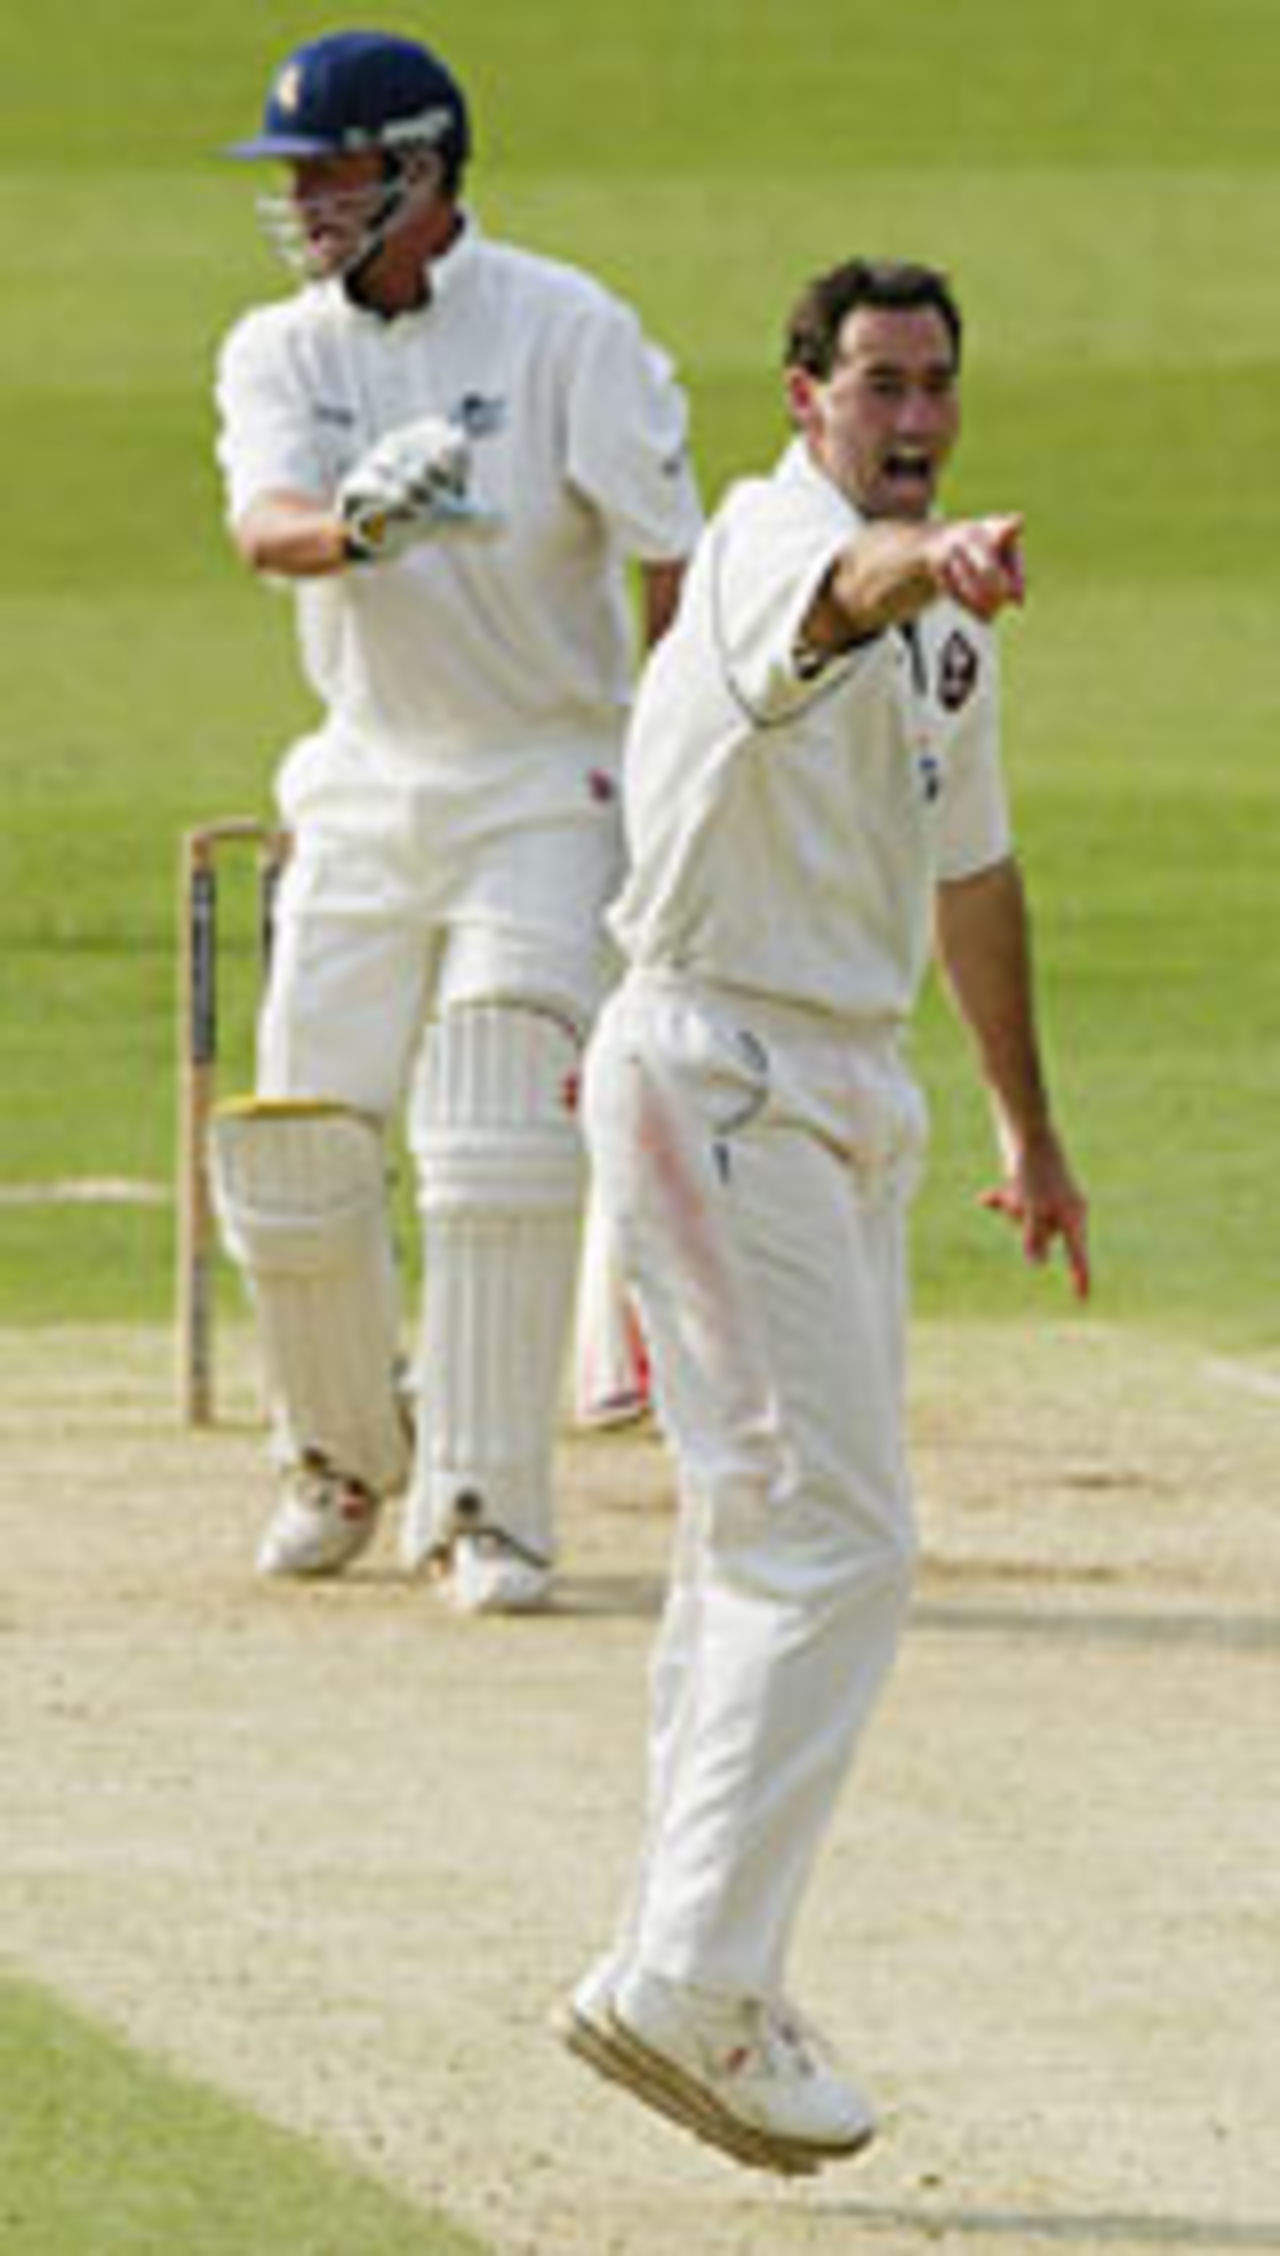 Martin Bicknell, Surrey v Kent, The Oval, May 27, 2004